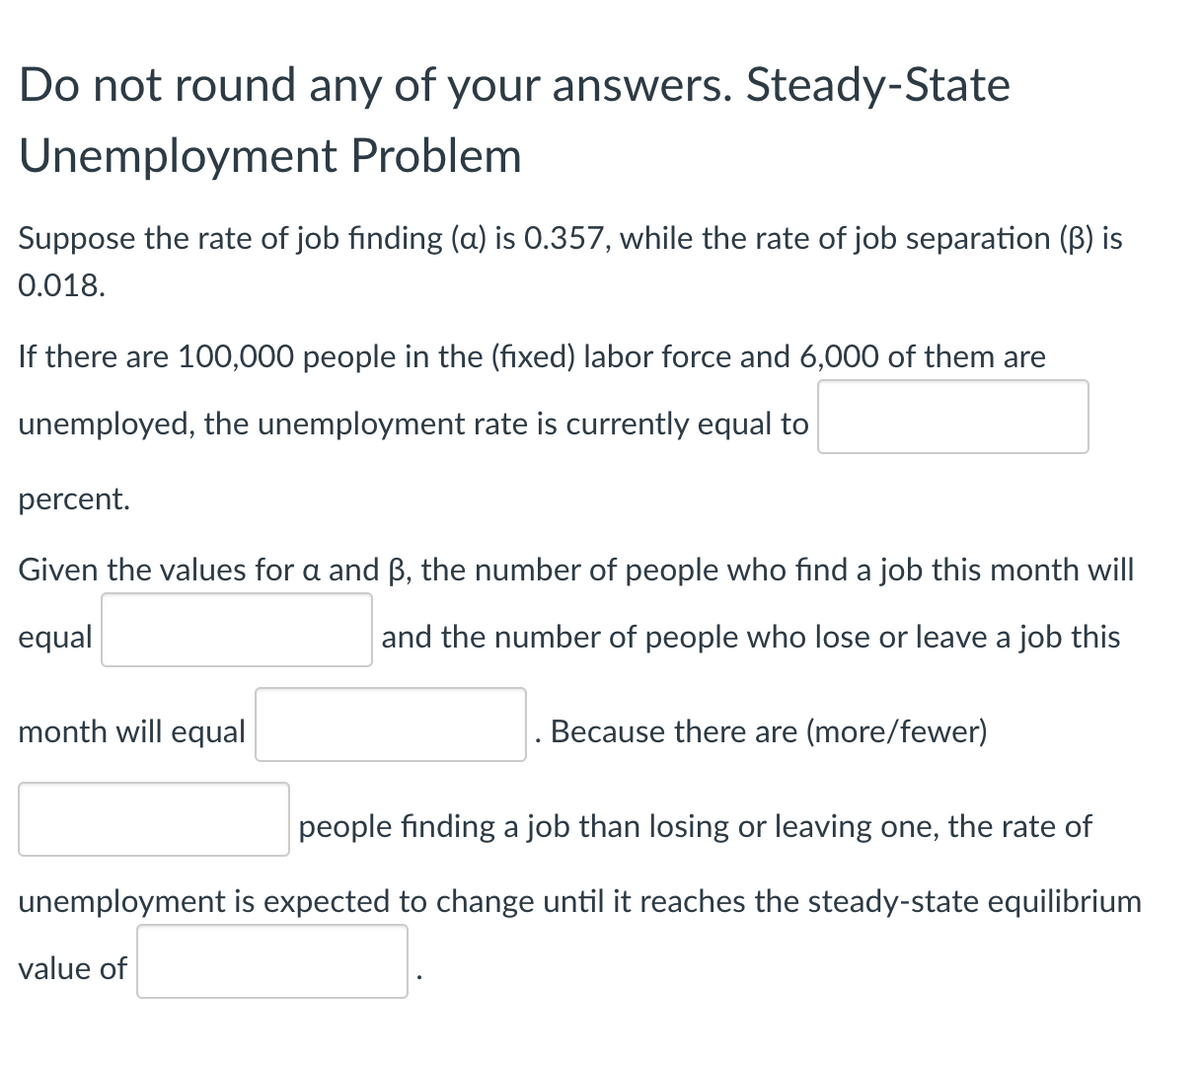 Do not round any of your answers. Steady-State
Unemployment Problem
Suppose the rate of job finding (a) is 0.357, while the rate of job separation (B) is
0.018.
If there are 100,000 people in the (fixed) labor force and 6,000 of them are
unemployed, the unemployment rate is currently equal to
percent.
Given the values for a and B, the number of people who find a job this month will
equal
and the number of people who lose or leave a job this
month will equal
Because there are (more/fewer)
people finding a job than losing or leaving one, the rate of
unemployment is expected to change until it reaches the steady-state equilibrium
value of
